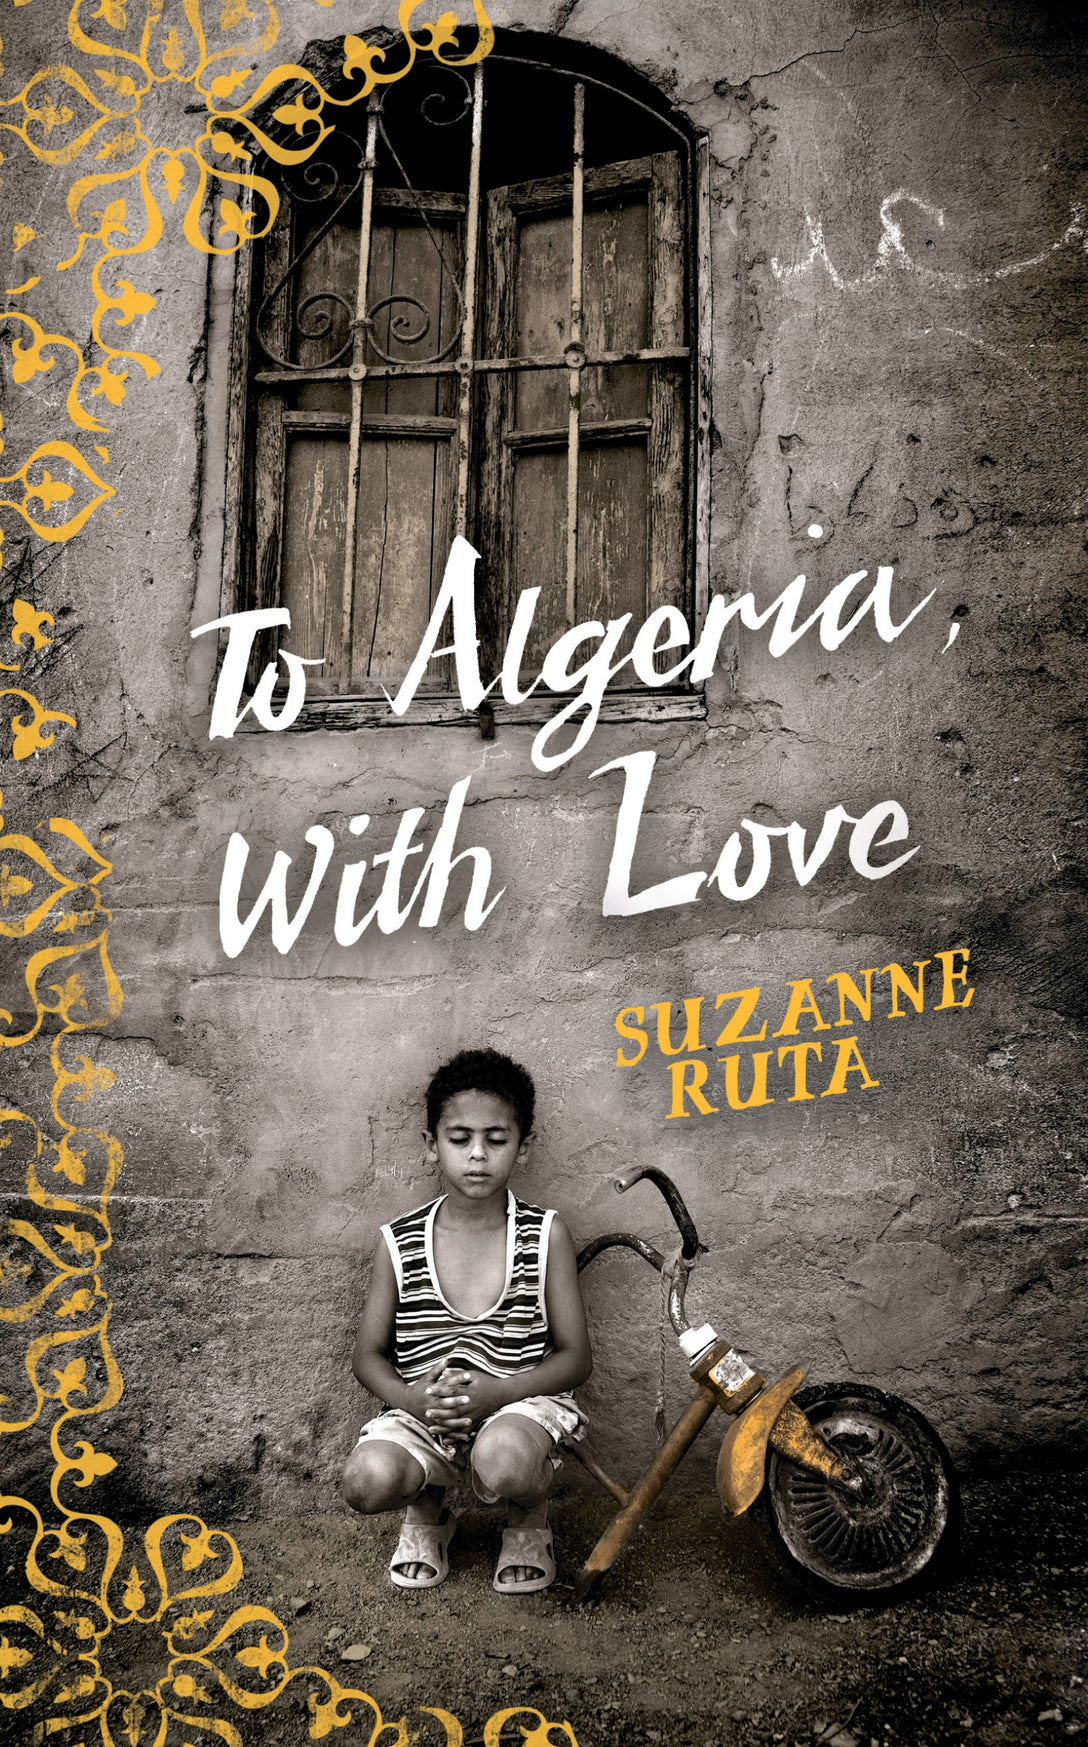 To Algeria, With Love by Suzanne Ruta